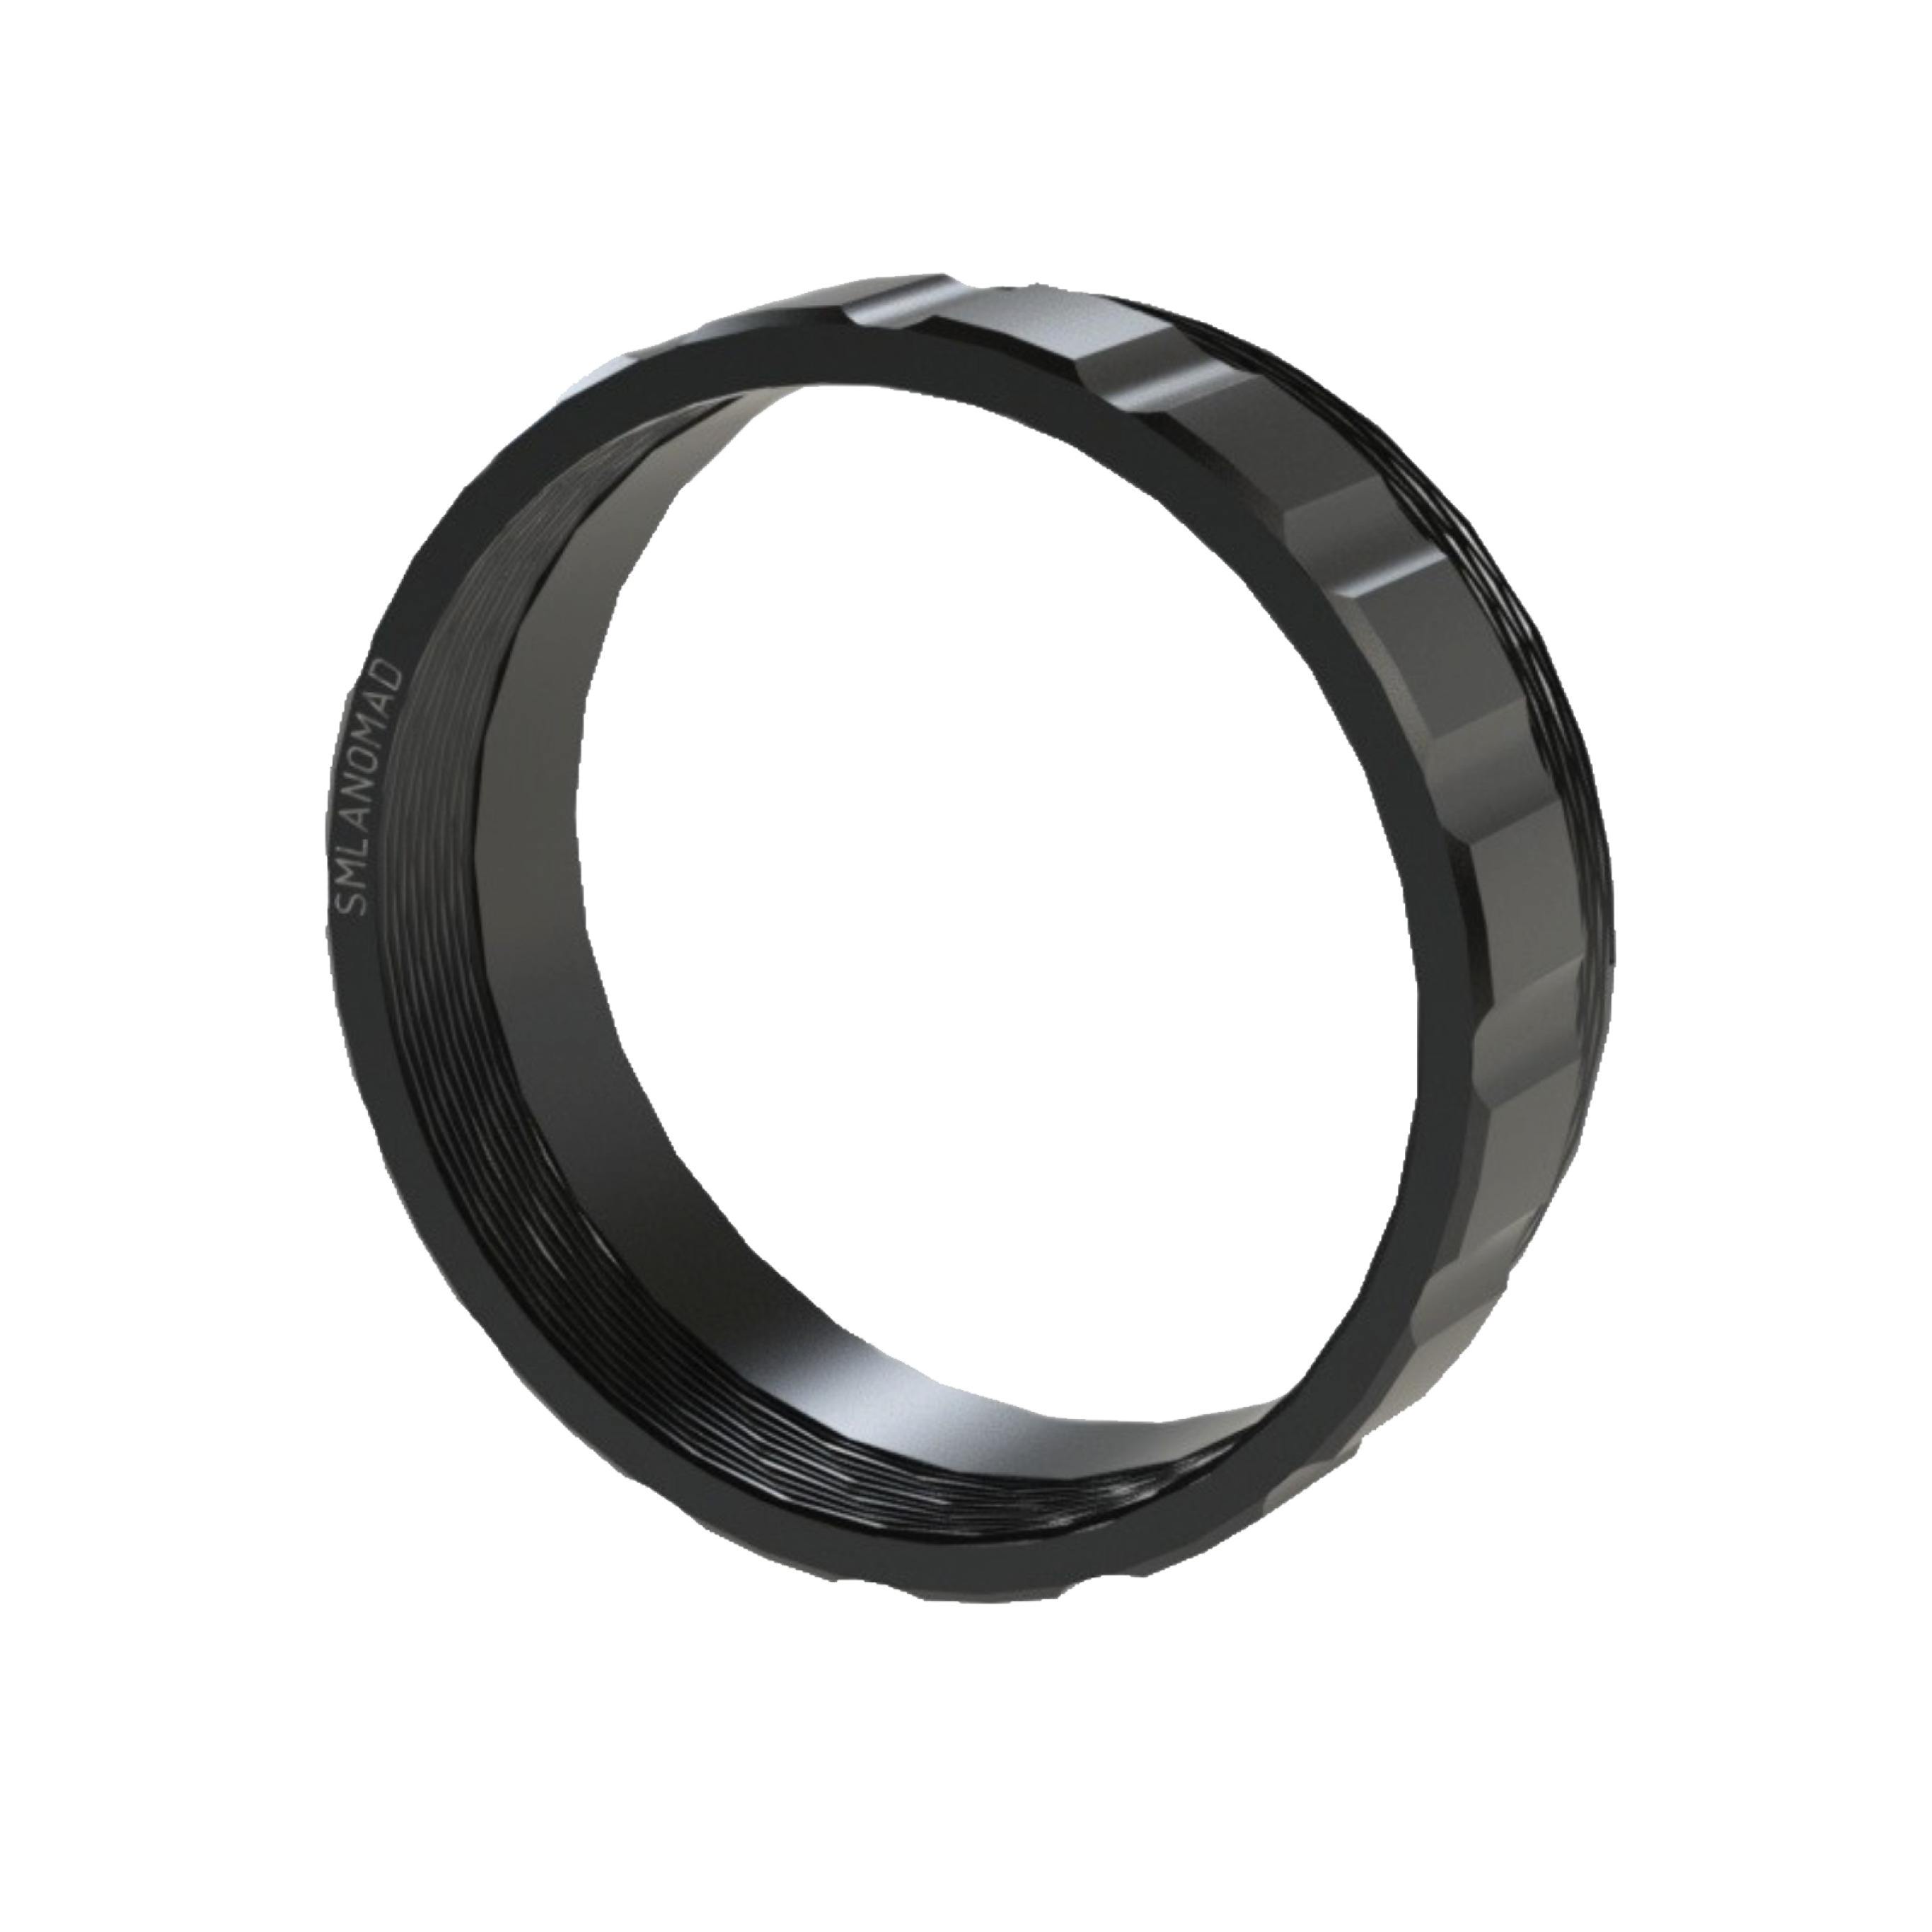 NOMAD TO OPTUM LENS ADAPTER